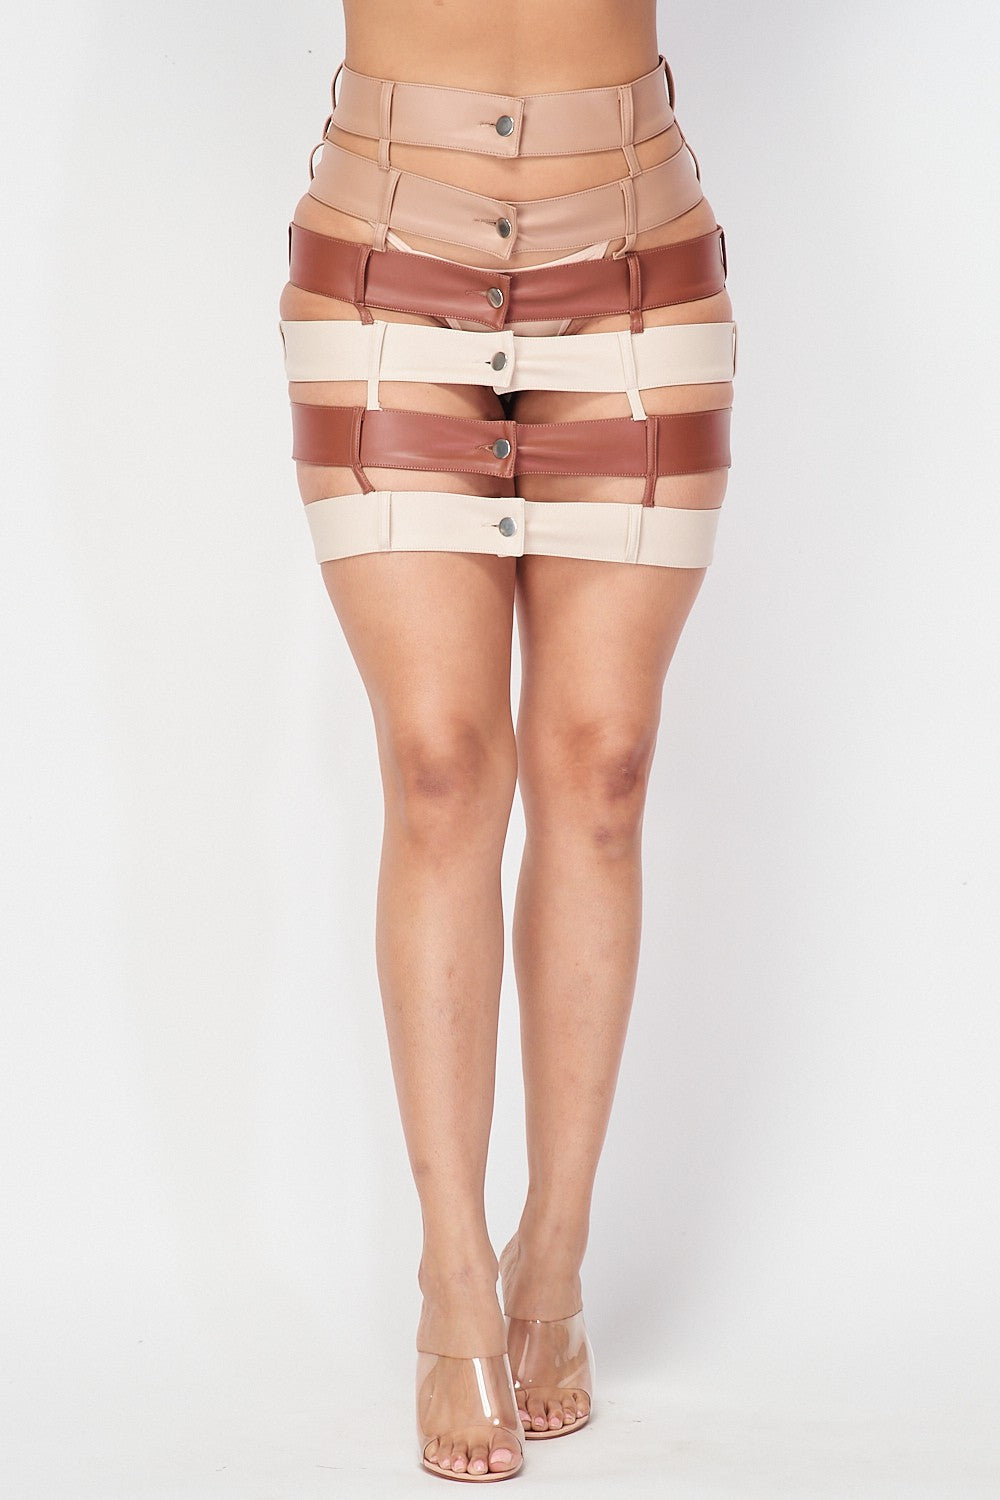 Track Star Faux Leather Skirt